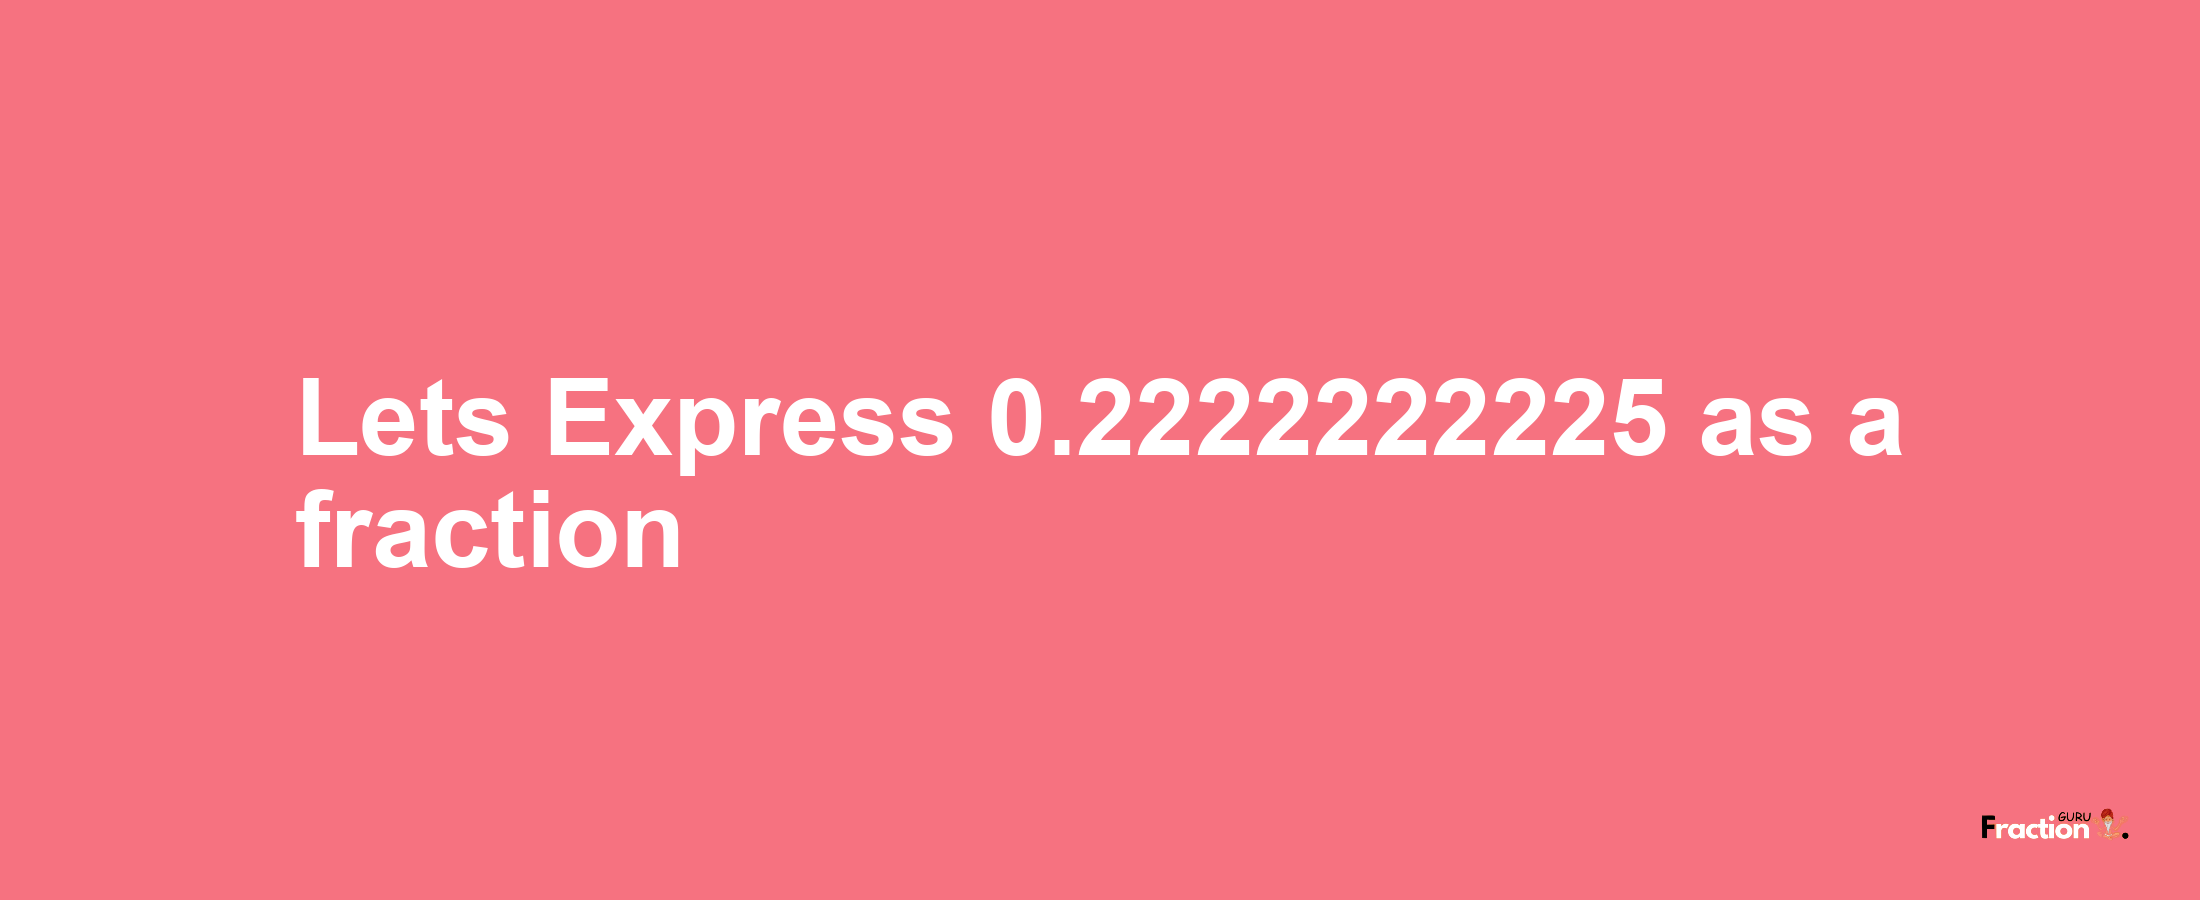 Lets Express 0.2222222225 as afraction